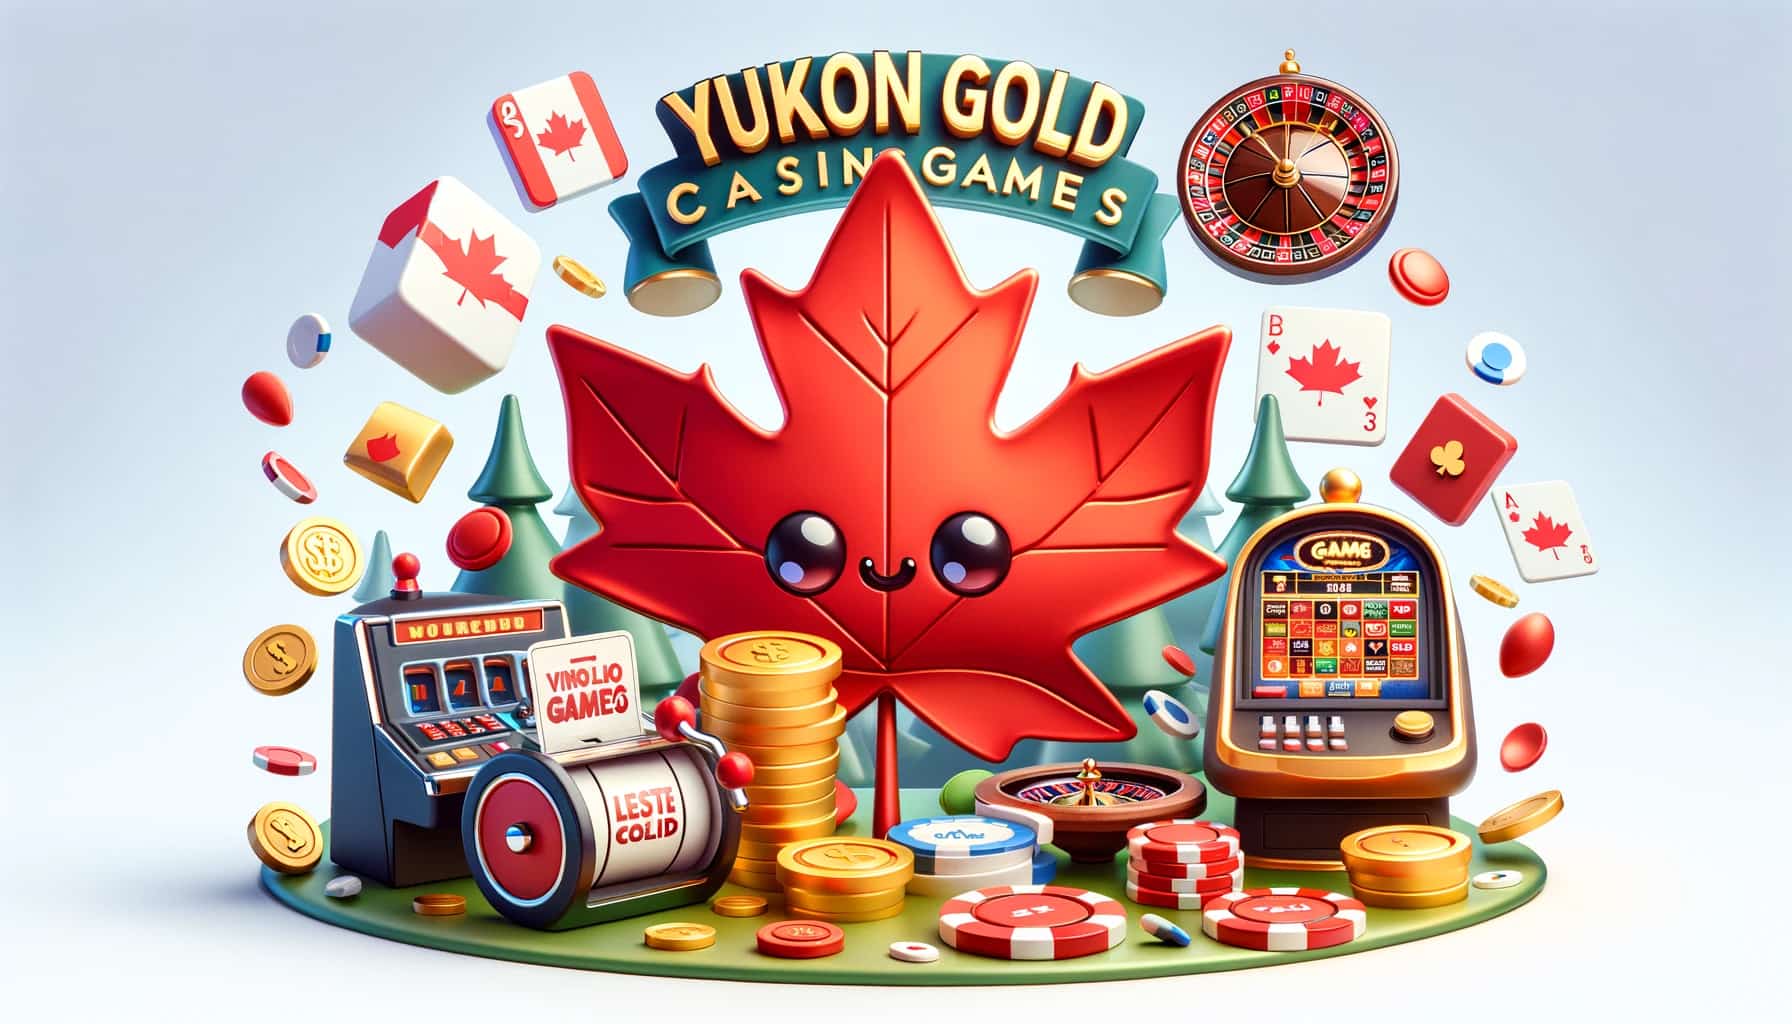 Top Youkon Gold games among Canadians